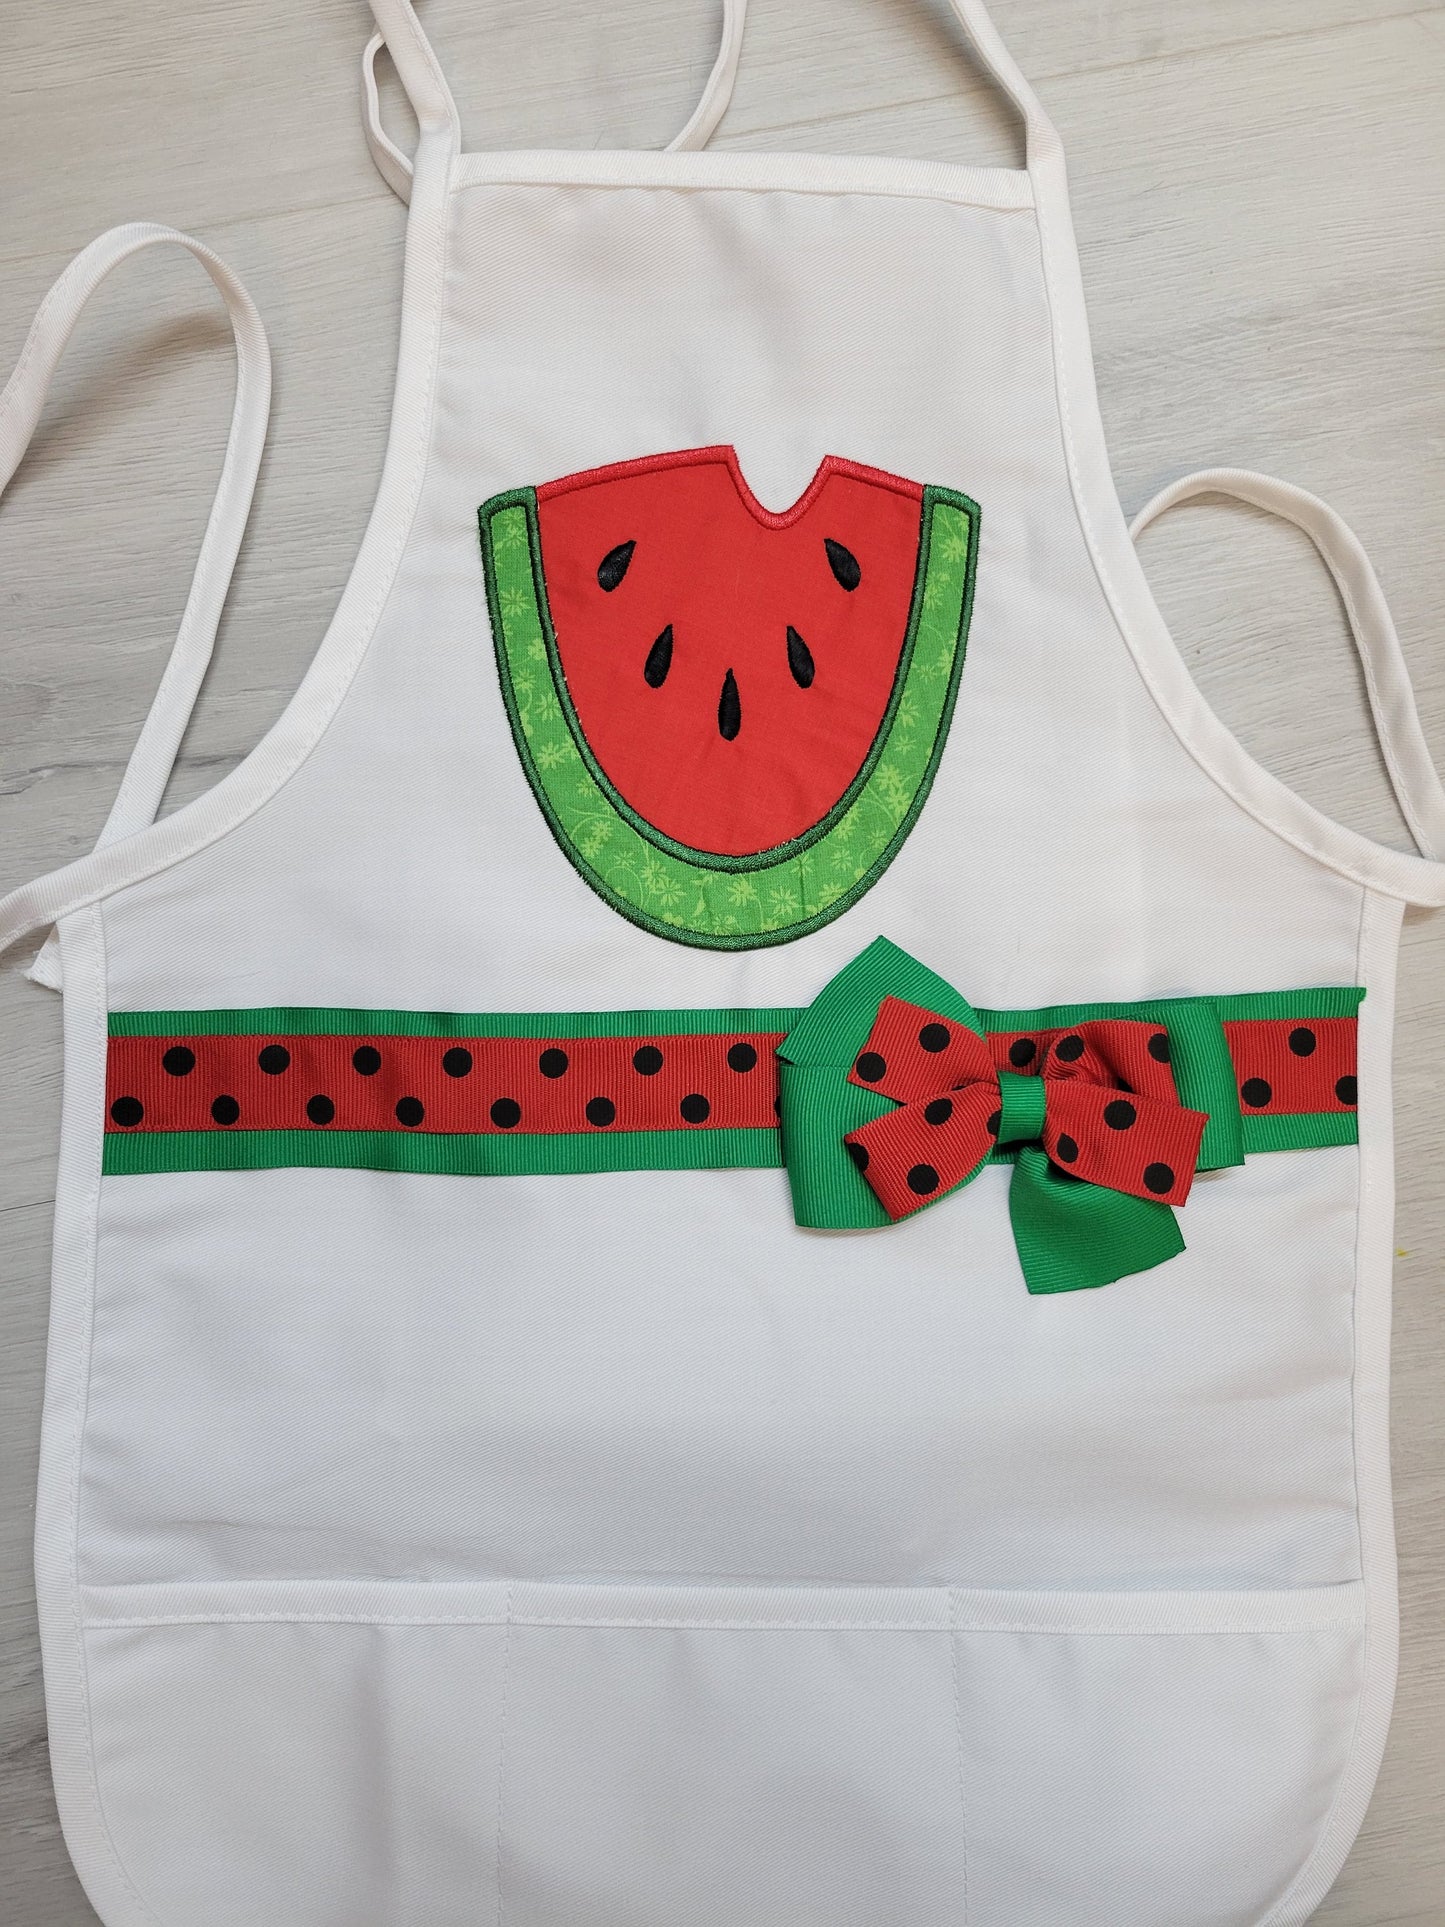 Kids Personalized Apron | Gifts For Kids | Child Chef Apron | Girls Watermelon Embroidered applique